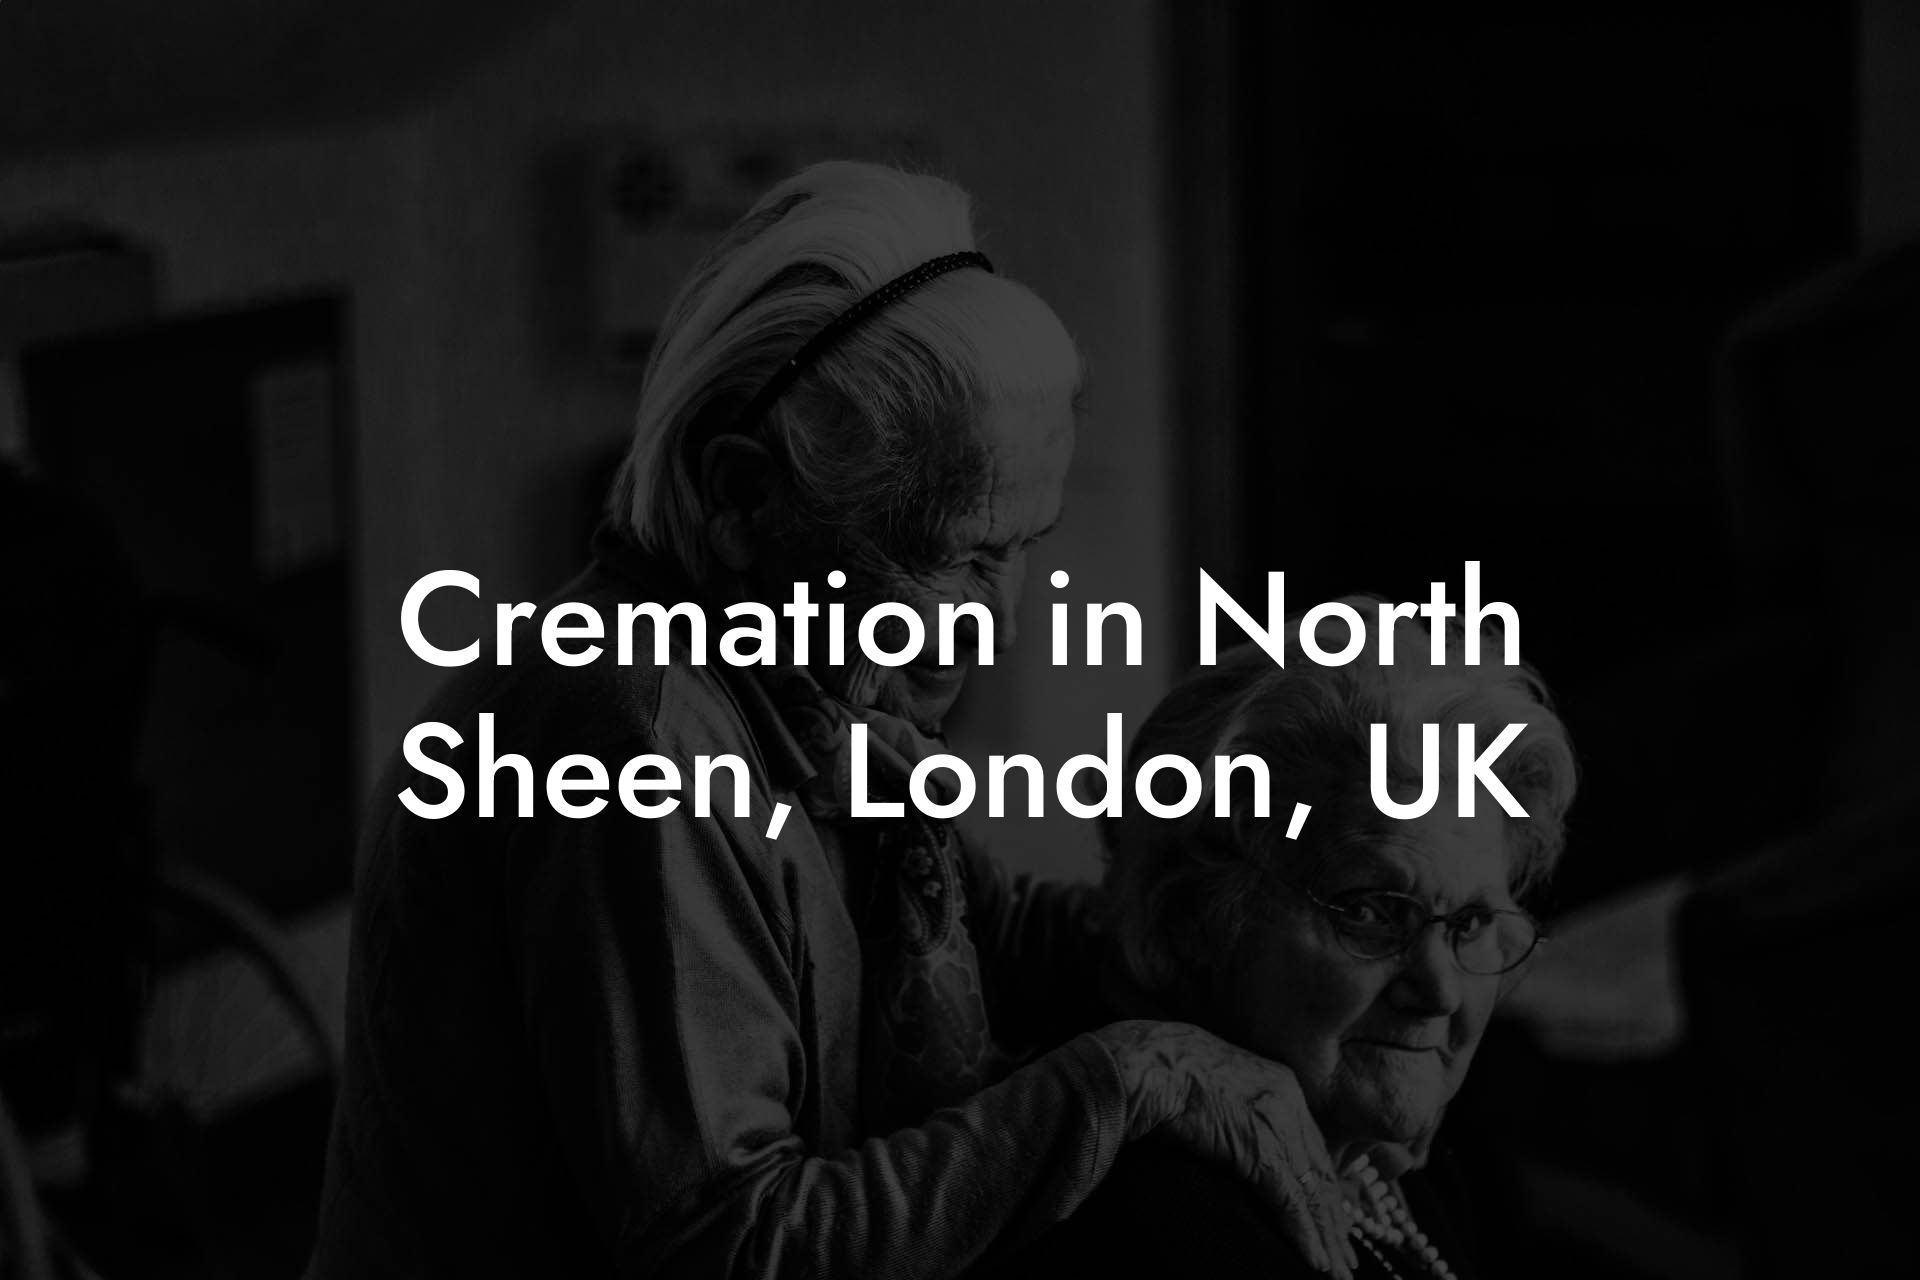 Cremation in North Sheen, London, UK